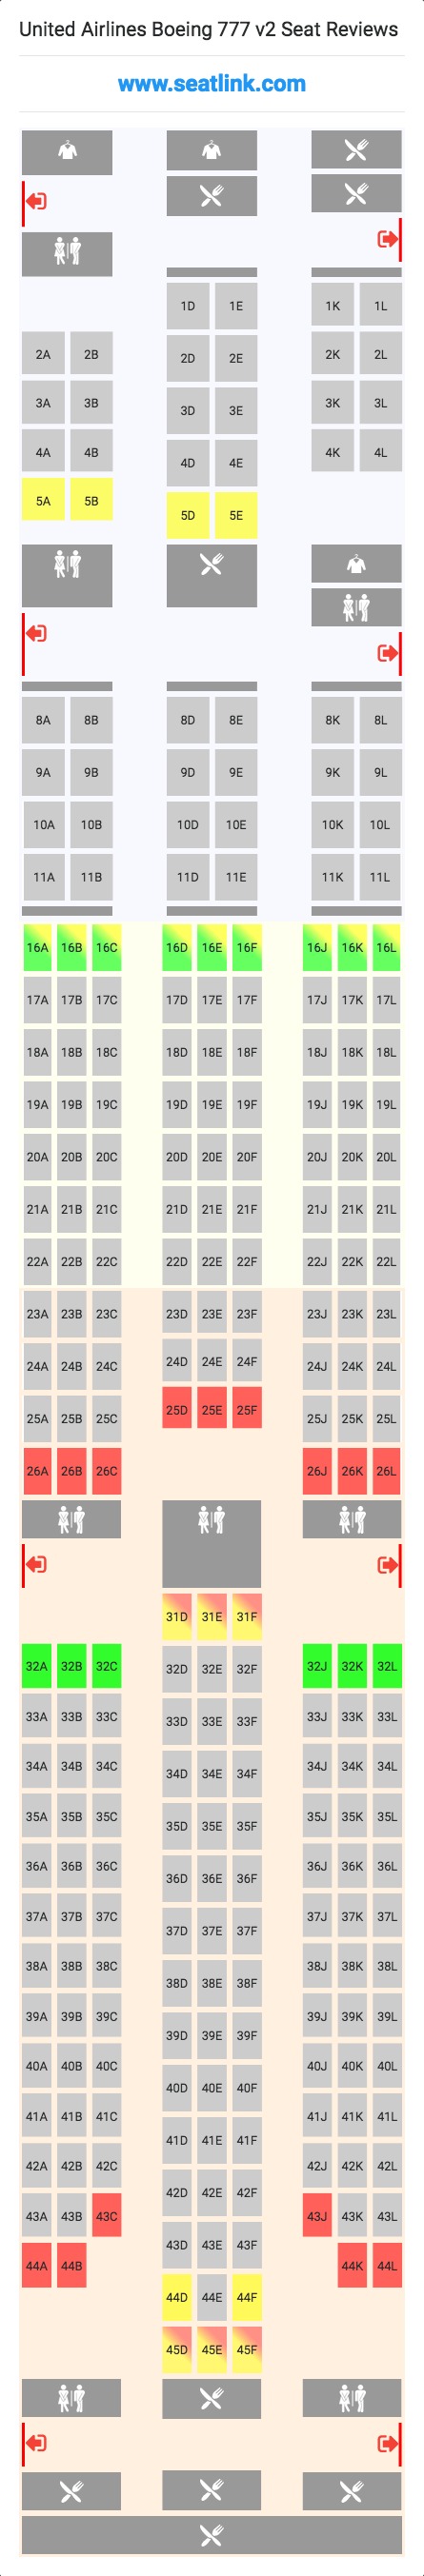 United Airlines Boeing 777 v2 (777) Seat Map